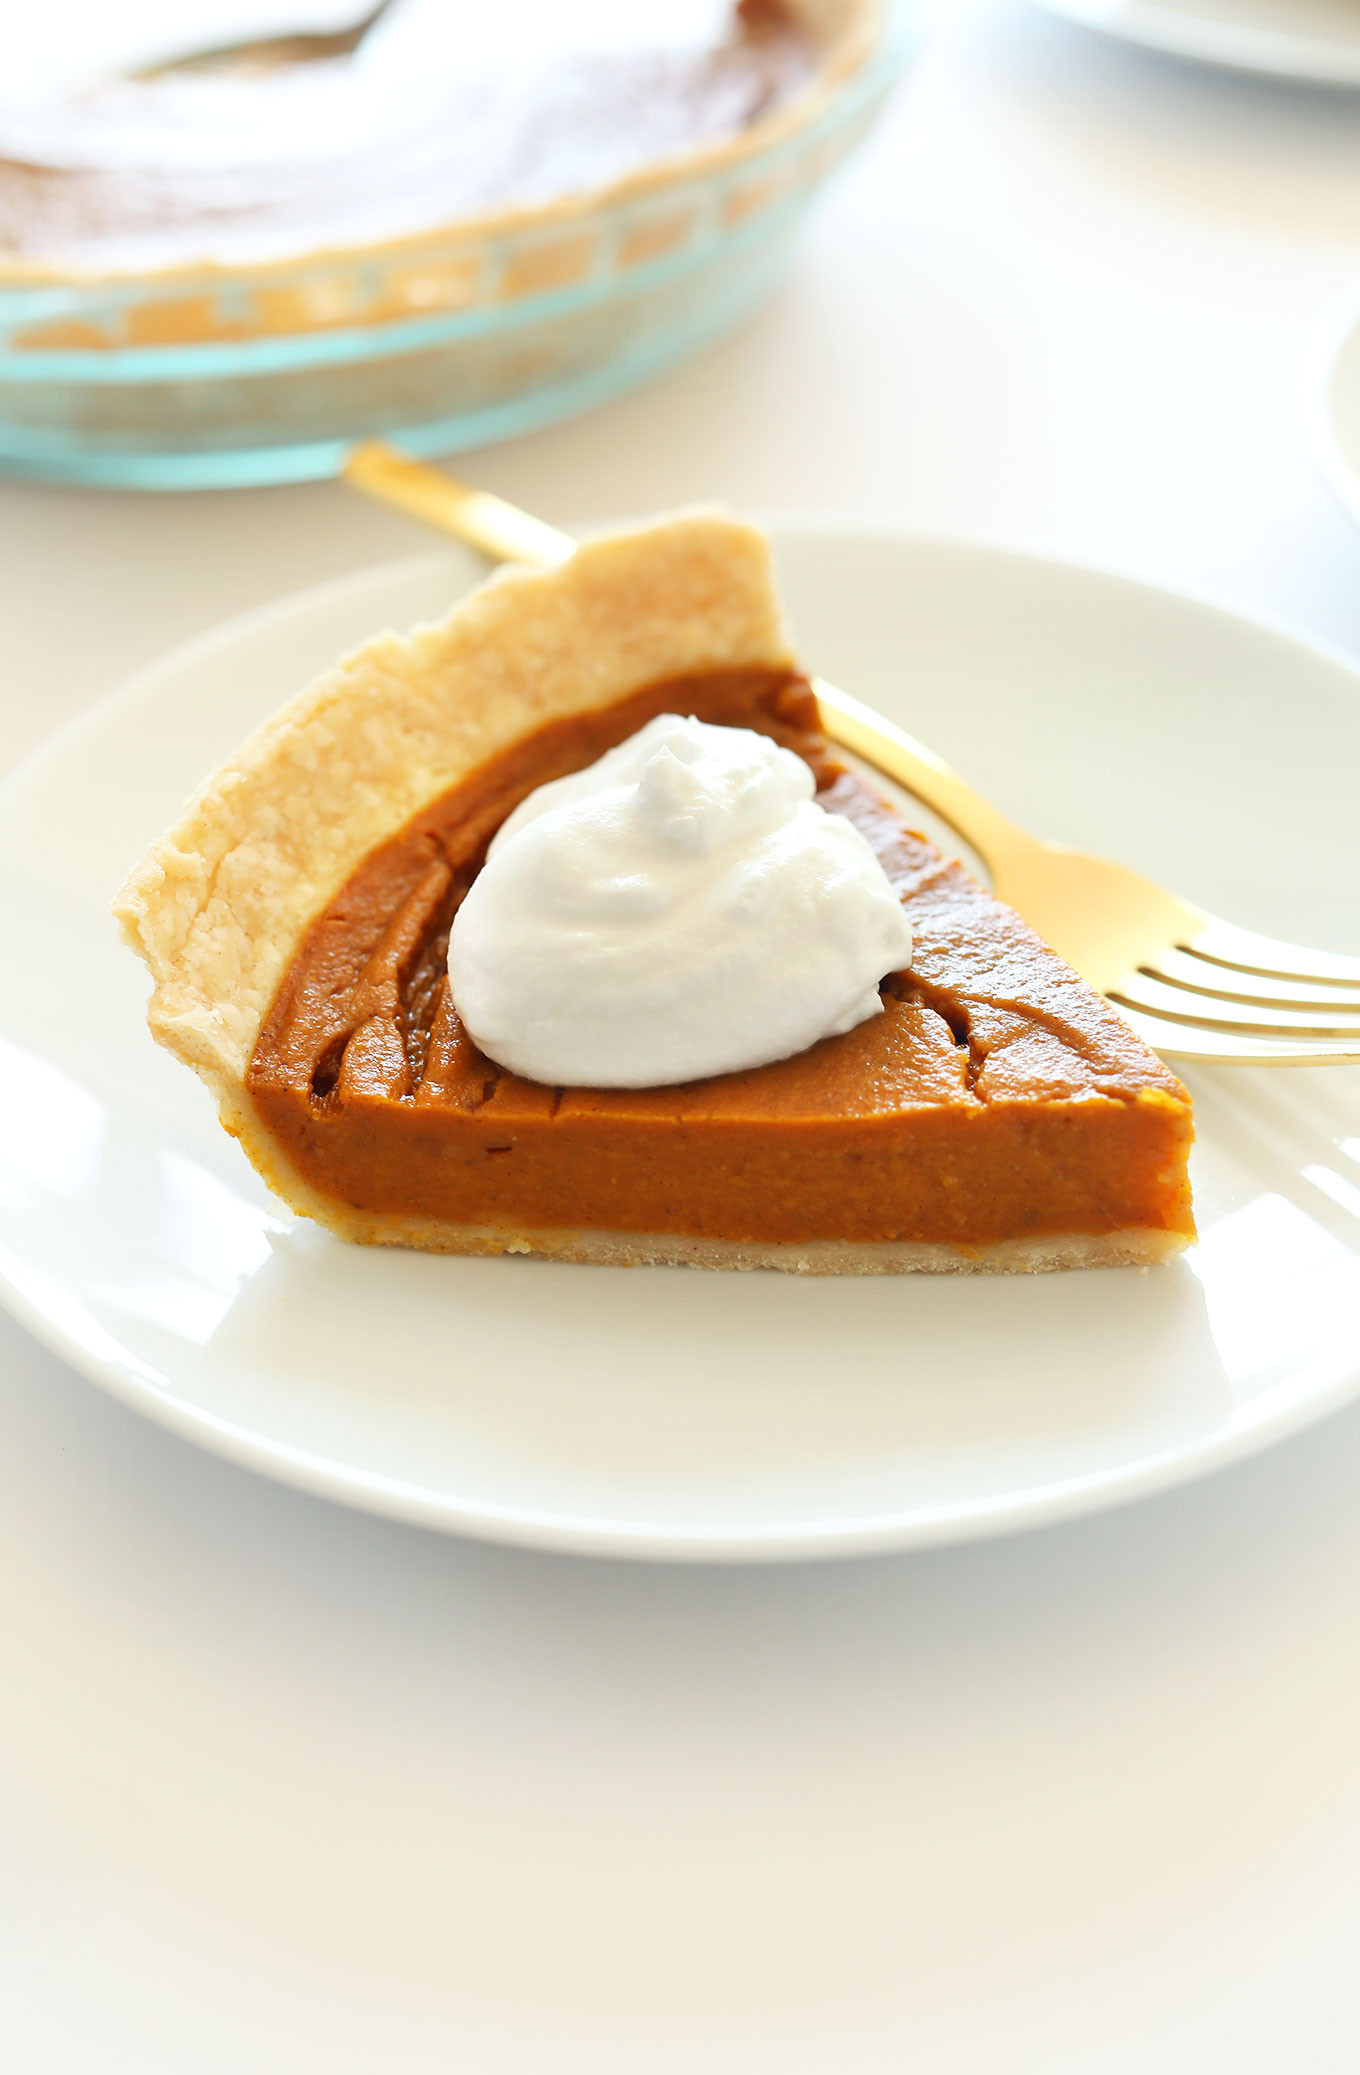 Pumpkin Pie Dairy Free
 7 Delicious Pie Recipes for Your Gluten Free Holiday Guests